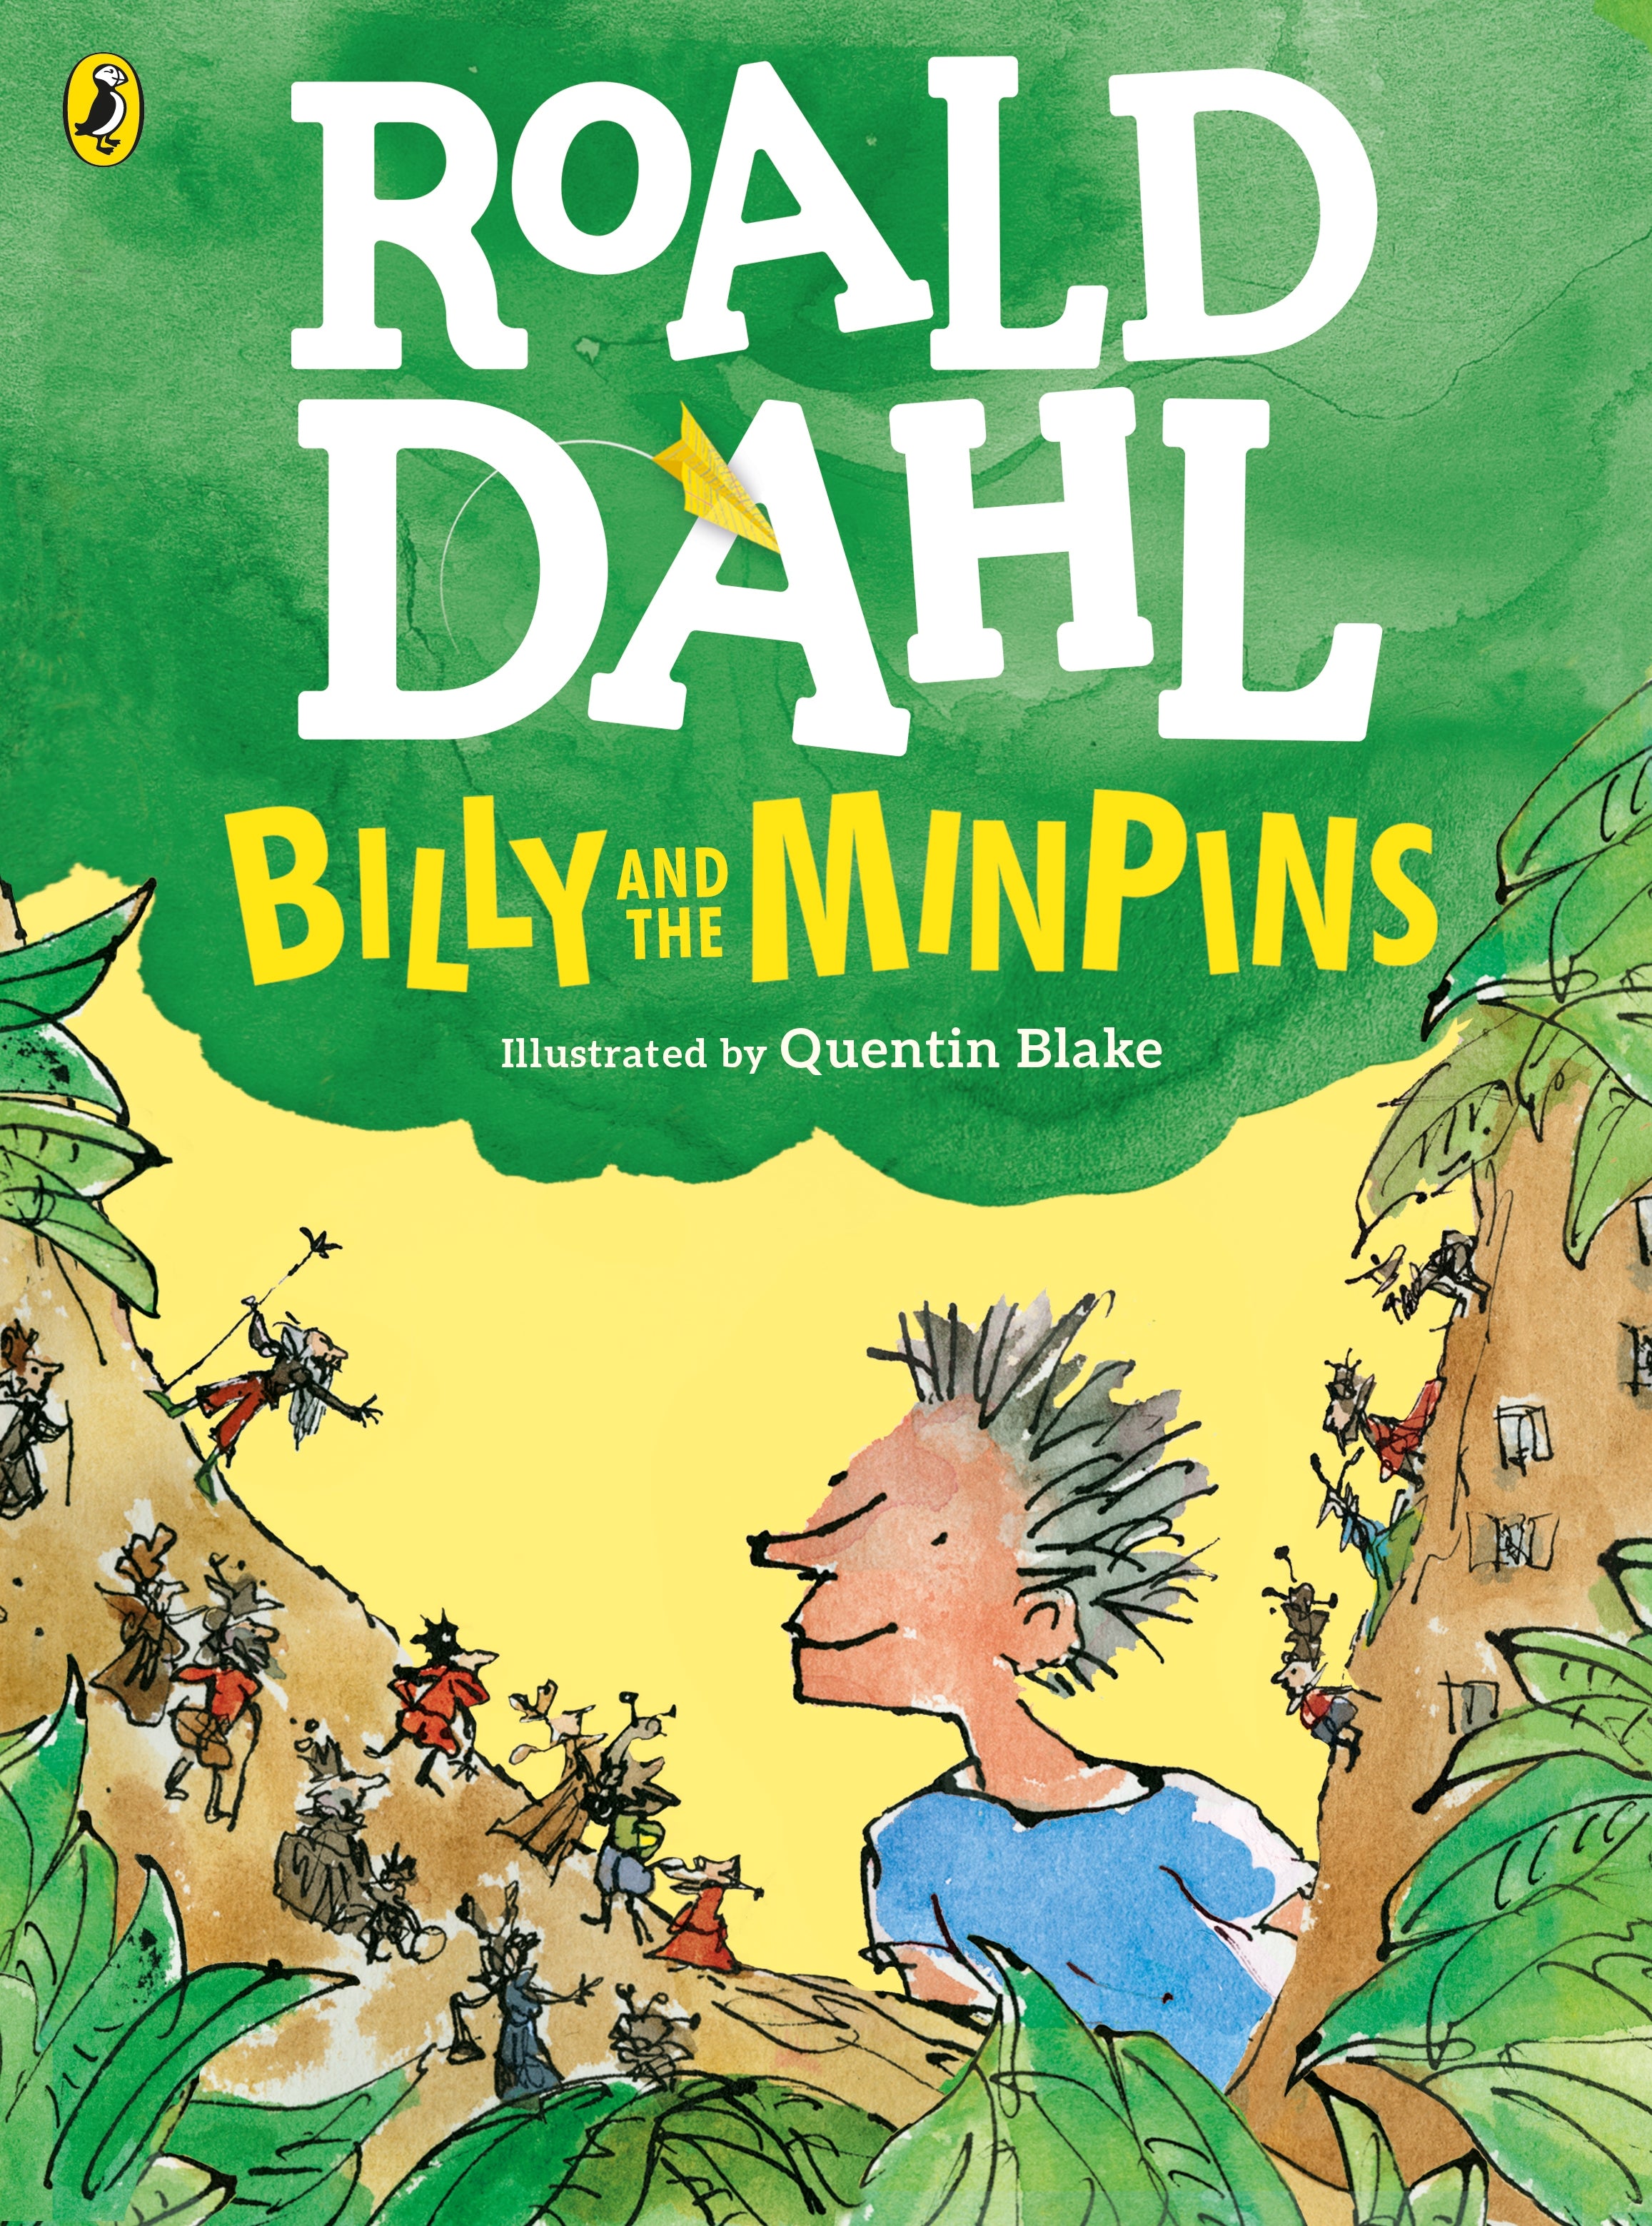 Billy and the Minpins (Colour Edition) Roald Dahl